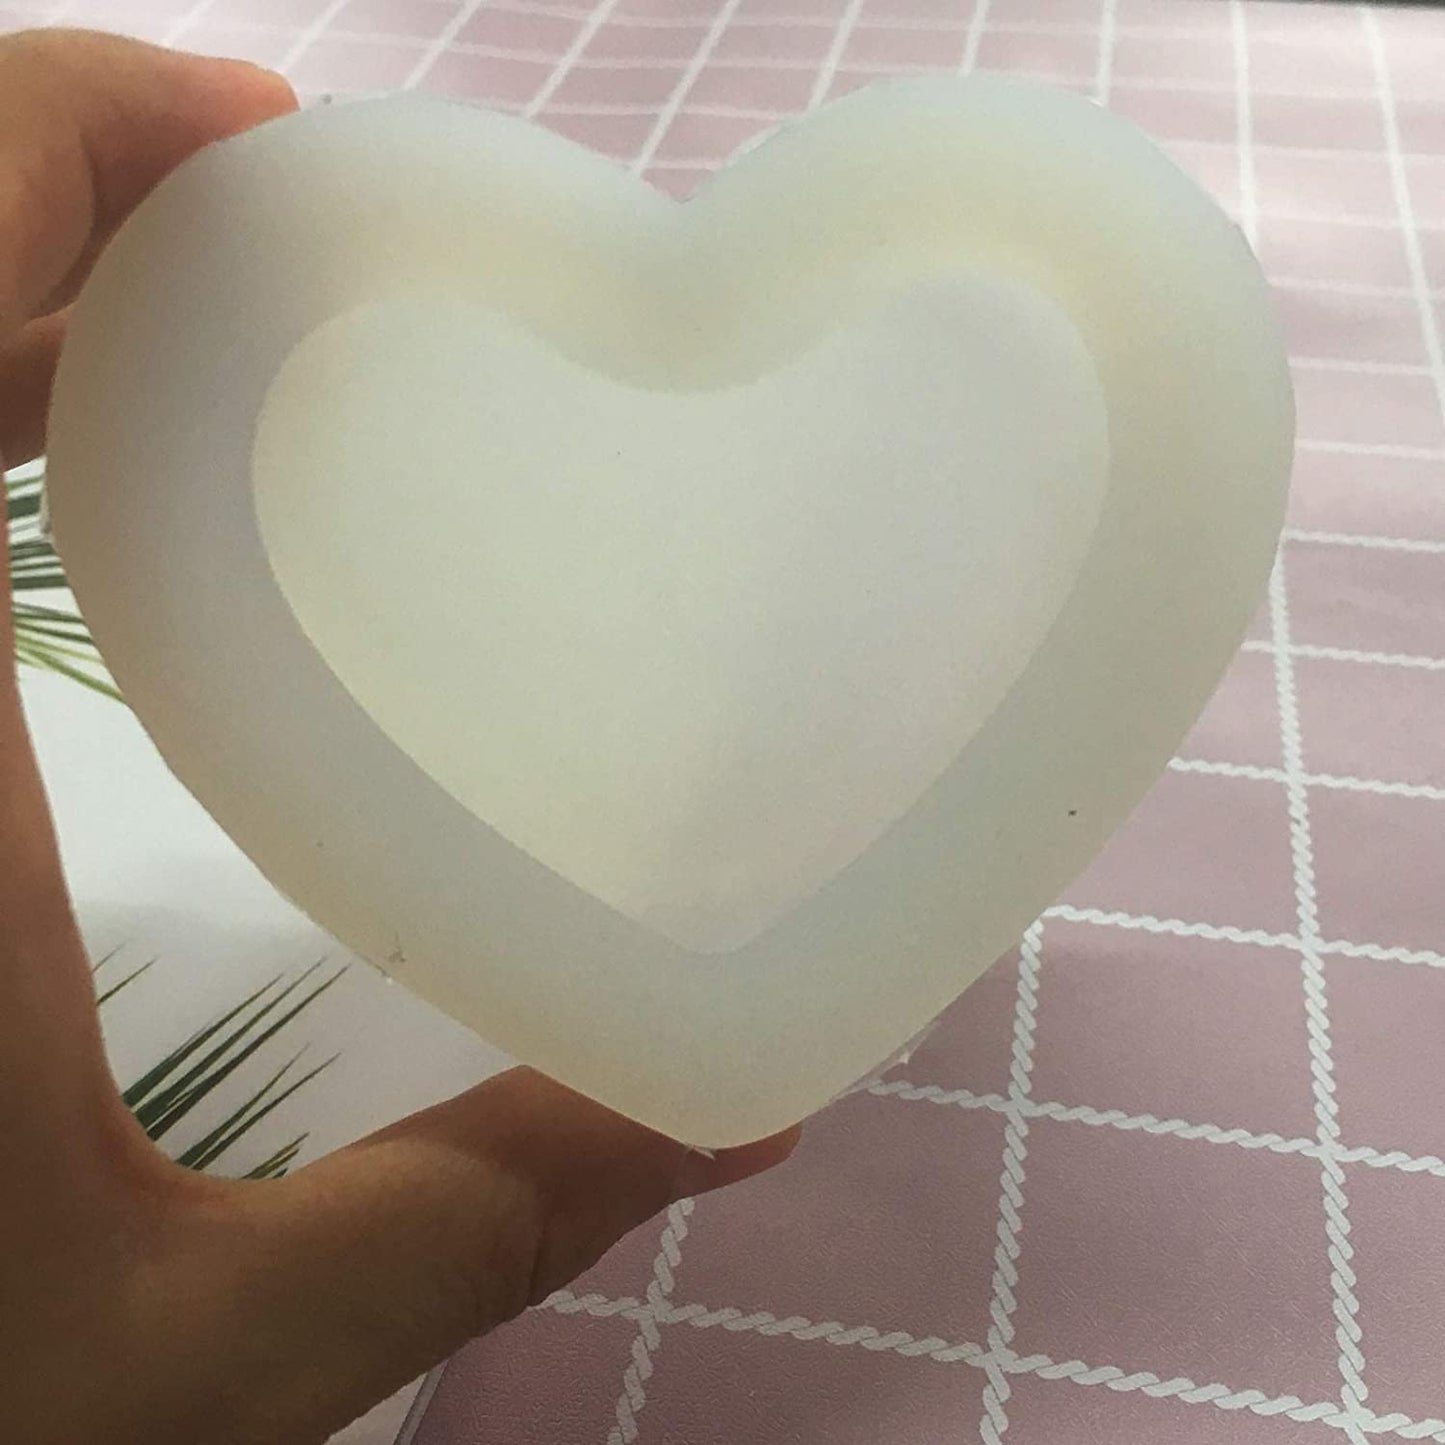 2pcs 3D Heart Silicone Molds for Epoxy Resin Small Mirror Heart